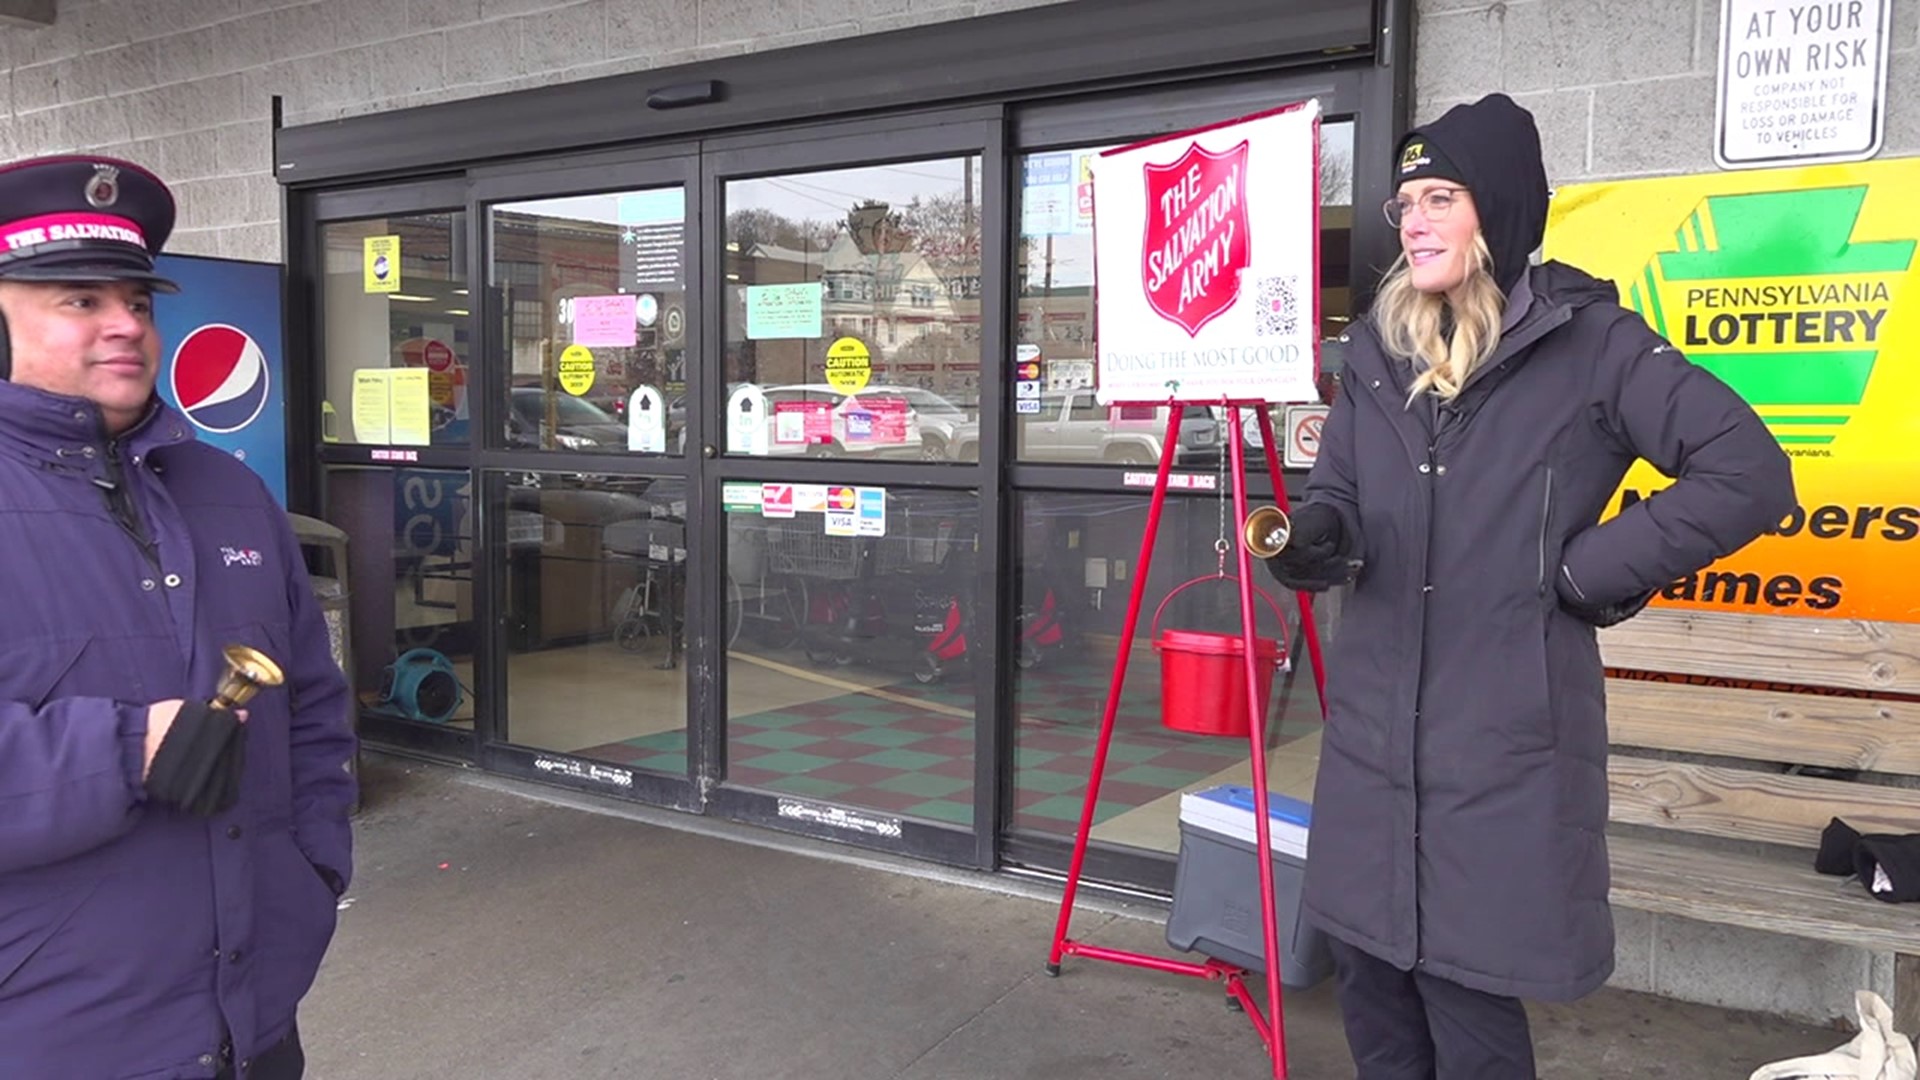 Chelsea sees what makes the Salvation Army's largest fundraiser a success year after year.